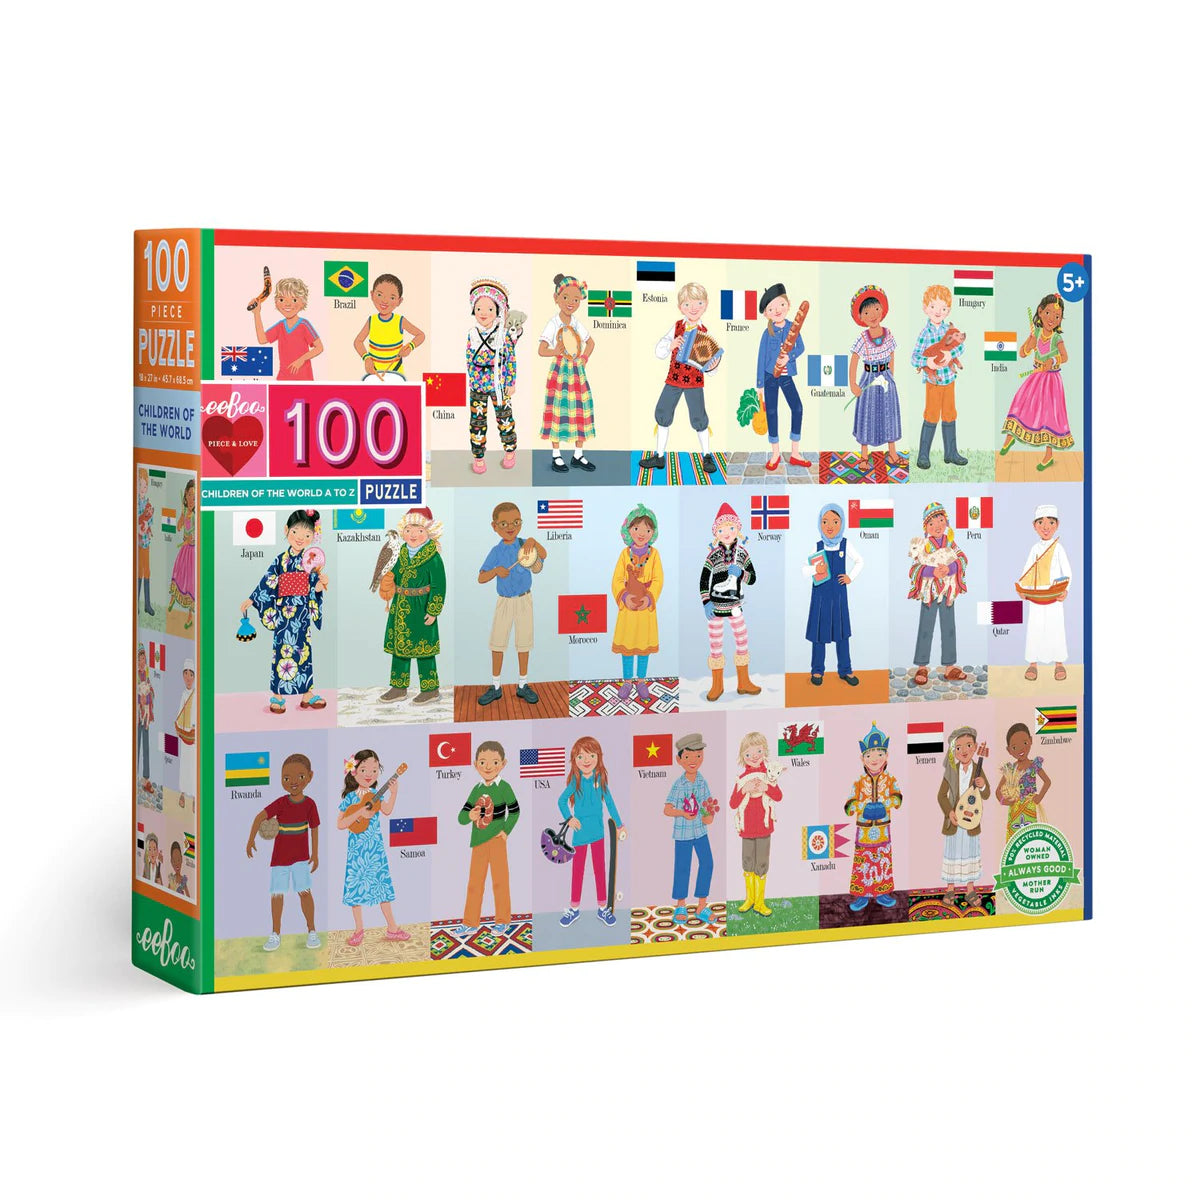 Children of the World 100 PC Puzzle by eeBoo